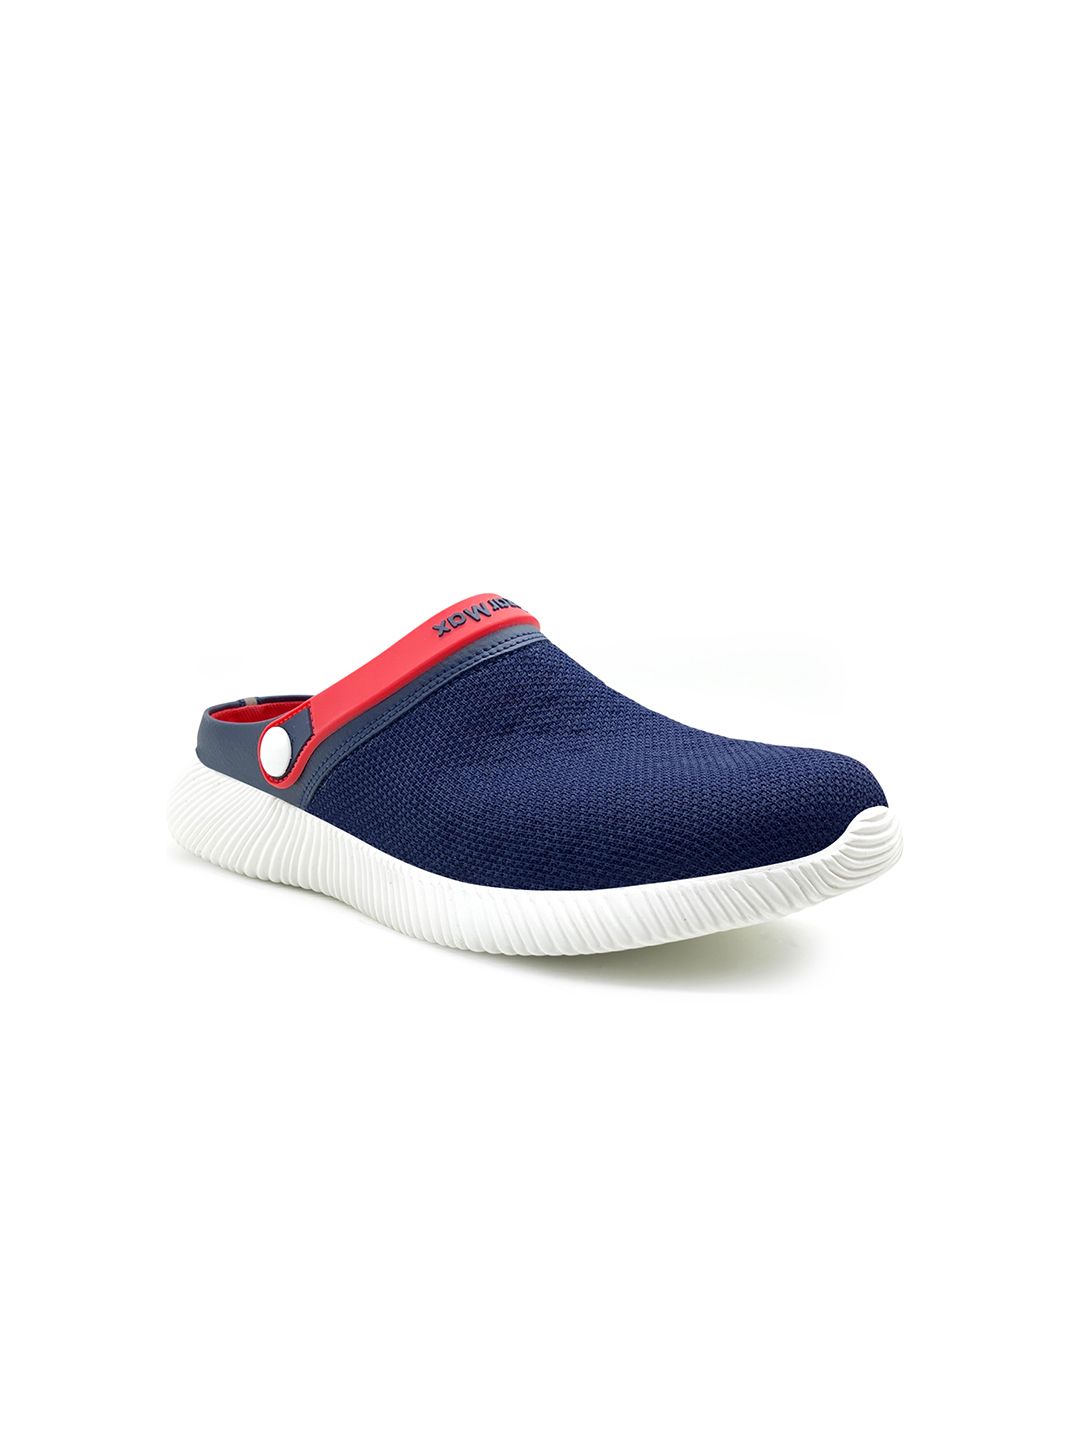 KazarMax Women Navy Blue & Red Clogs Price in India